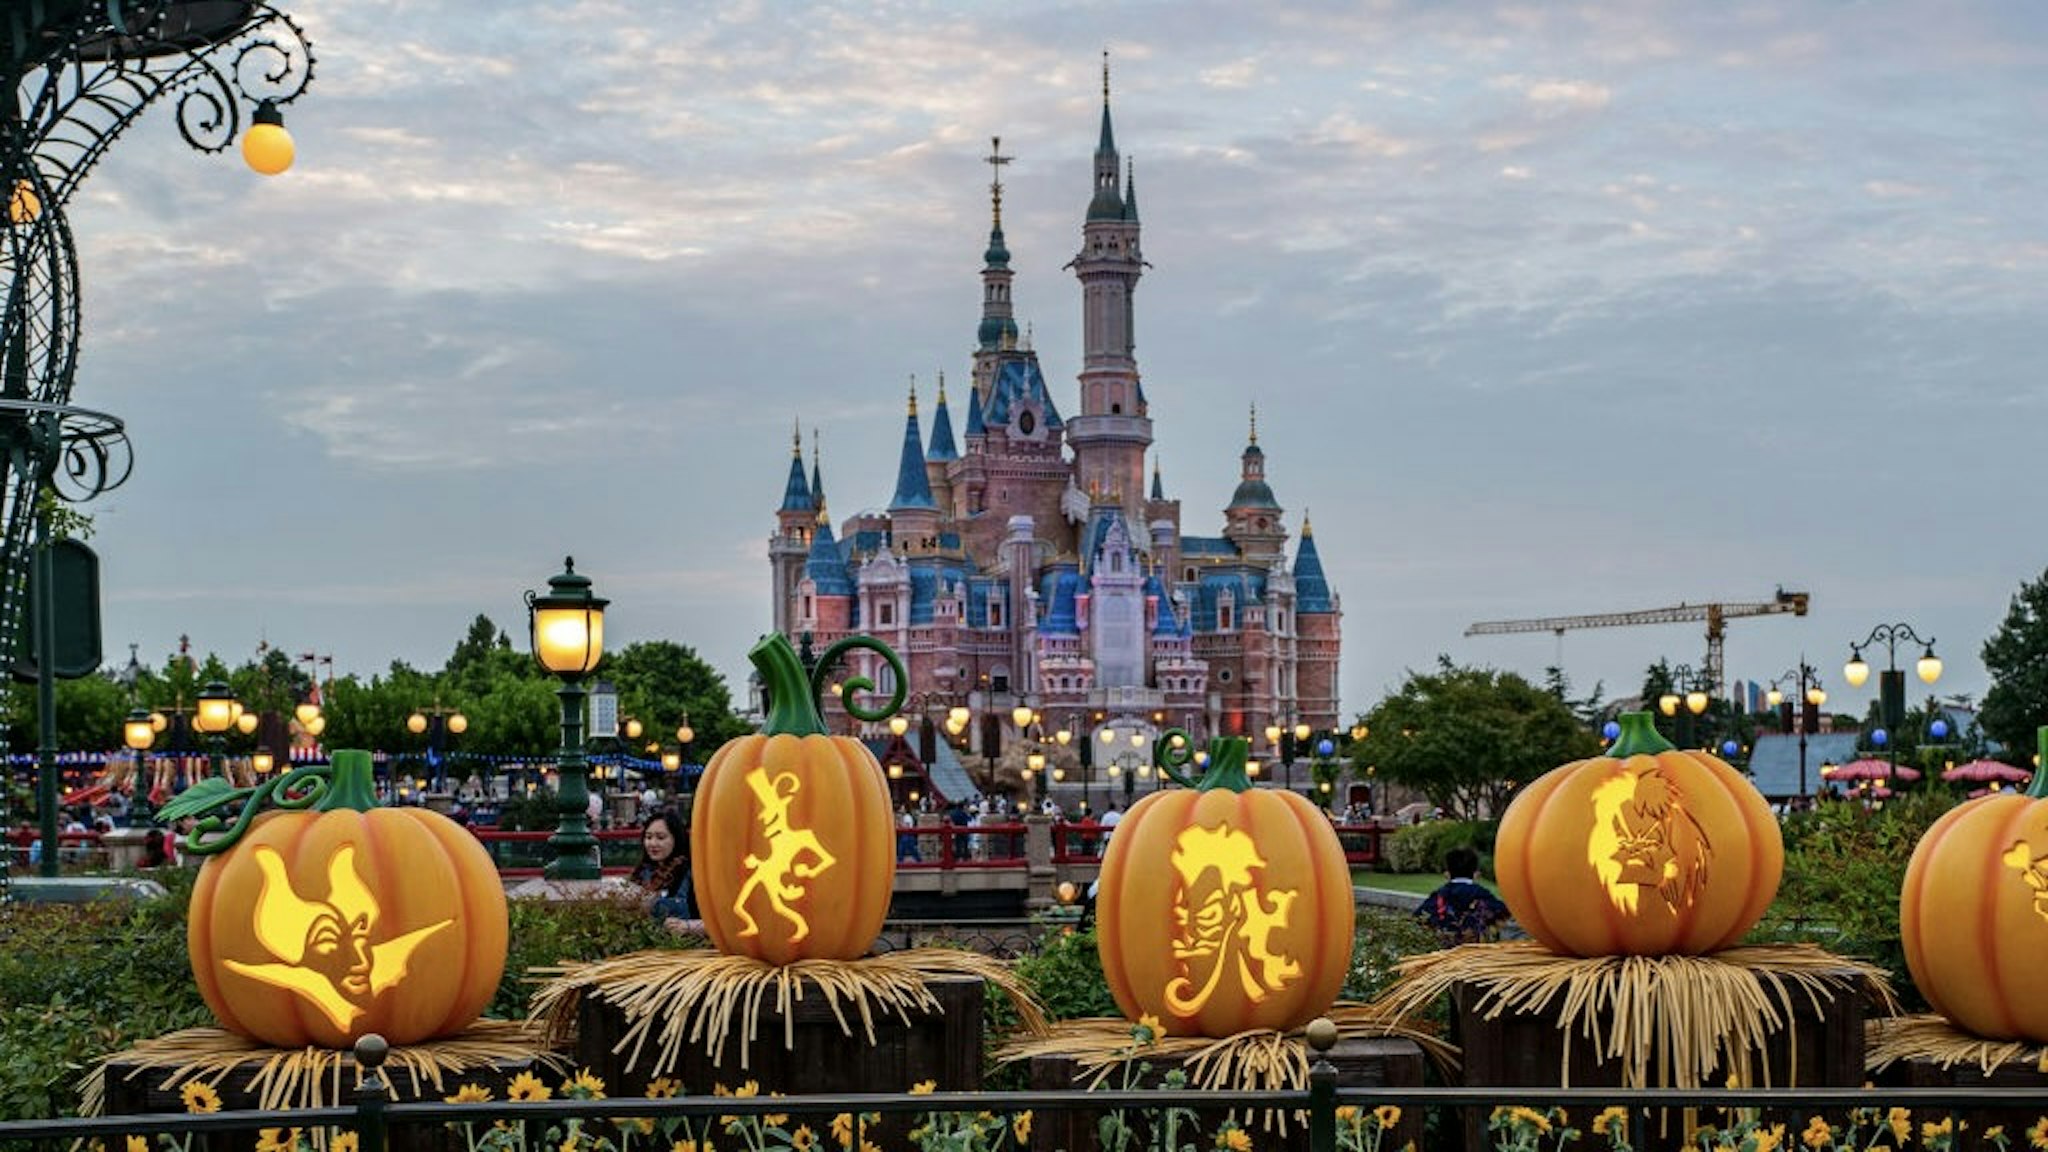 Shanghai Disneyland Prepares For Halloween SHANGHAI, CHINA - SEPTEMBER 23: Pumpkin lanterns are illuminated at Shanghai Disneyland to welcome the upcoming Halloween on September 23, 2022 in Shanghai, China. (Photo by VCG/VCG via Getty Images) VCG / Contributor